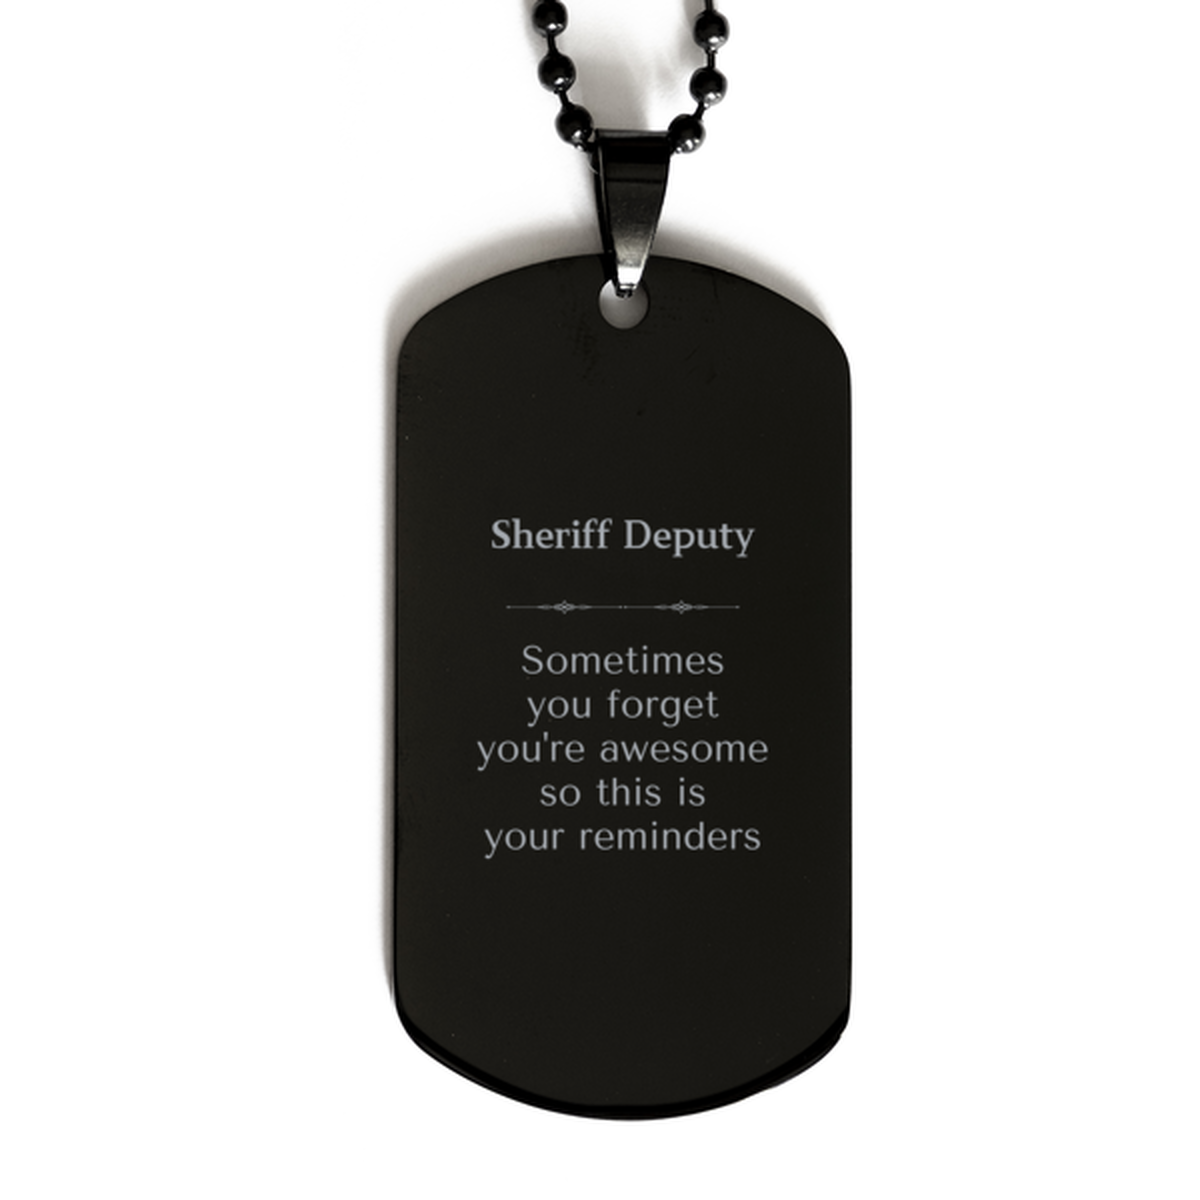 Sentimental Sheriff Deputy Black Dog Tag, Sheriff Deputy Sometimes you forget you're awesome so this is your reminders, Graduation Christmas Birthday Gifts for Sheriff Deputy, Men, Women, Coworkers